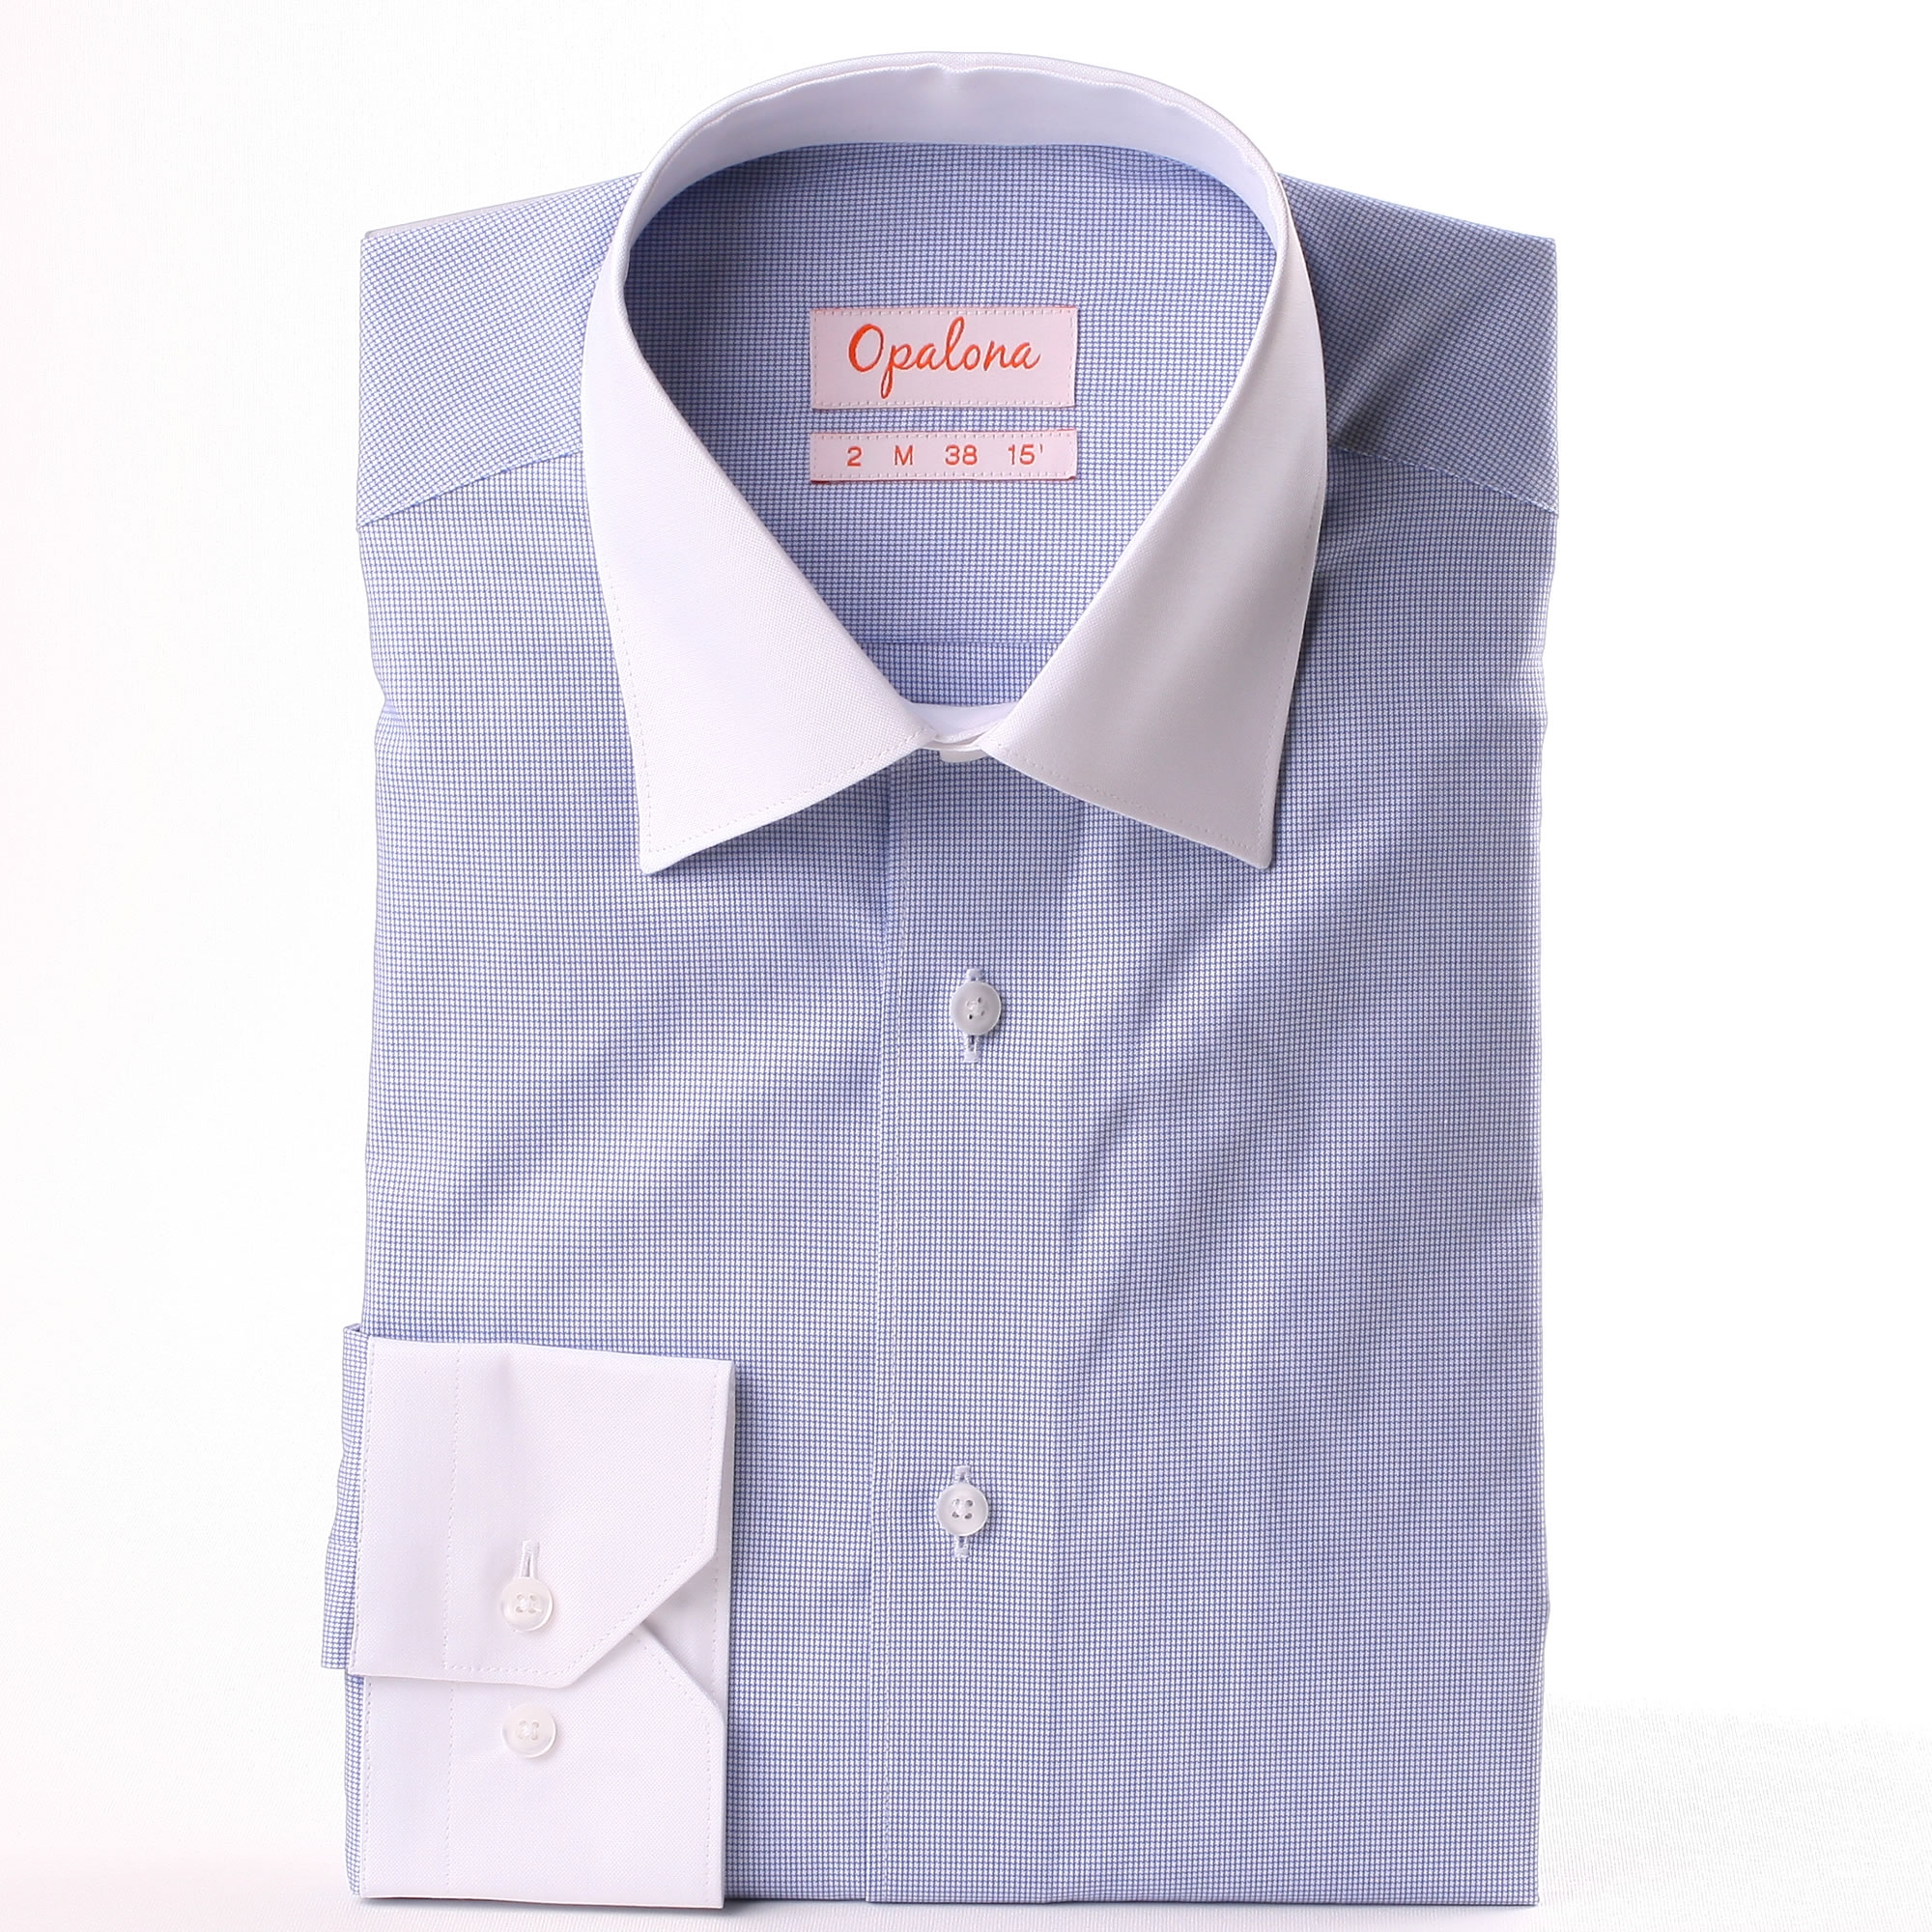 Blue Shirt White Collar : Épinglé sur Things to buy / If i interned ...